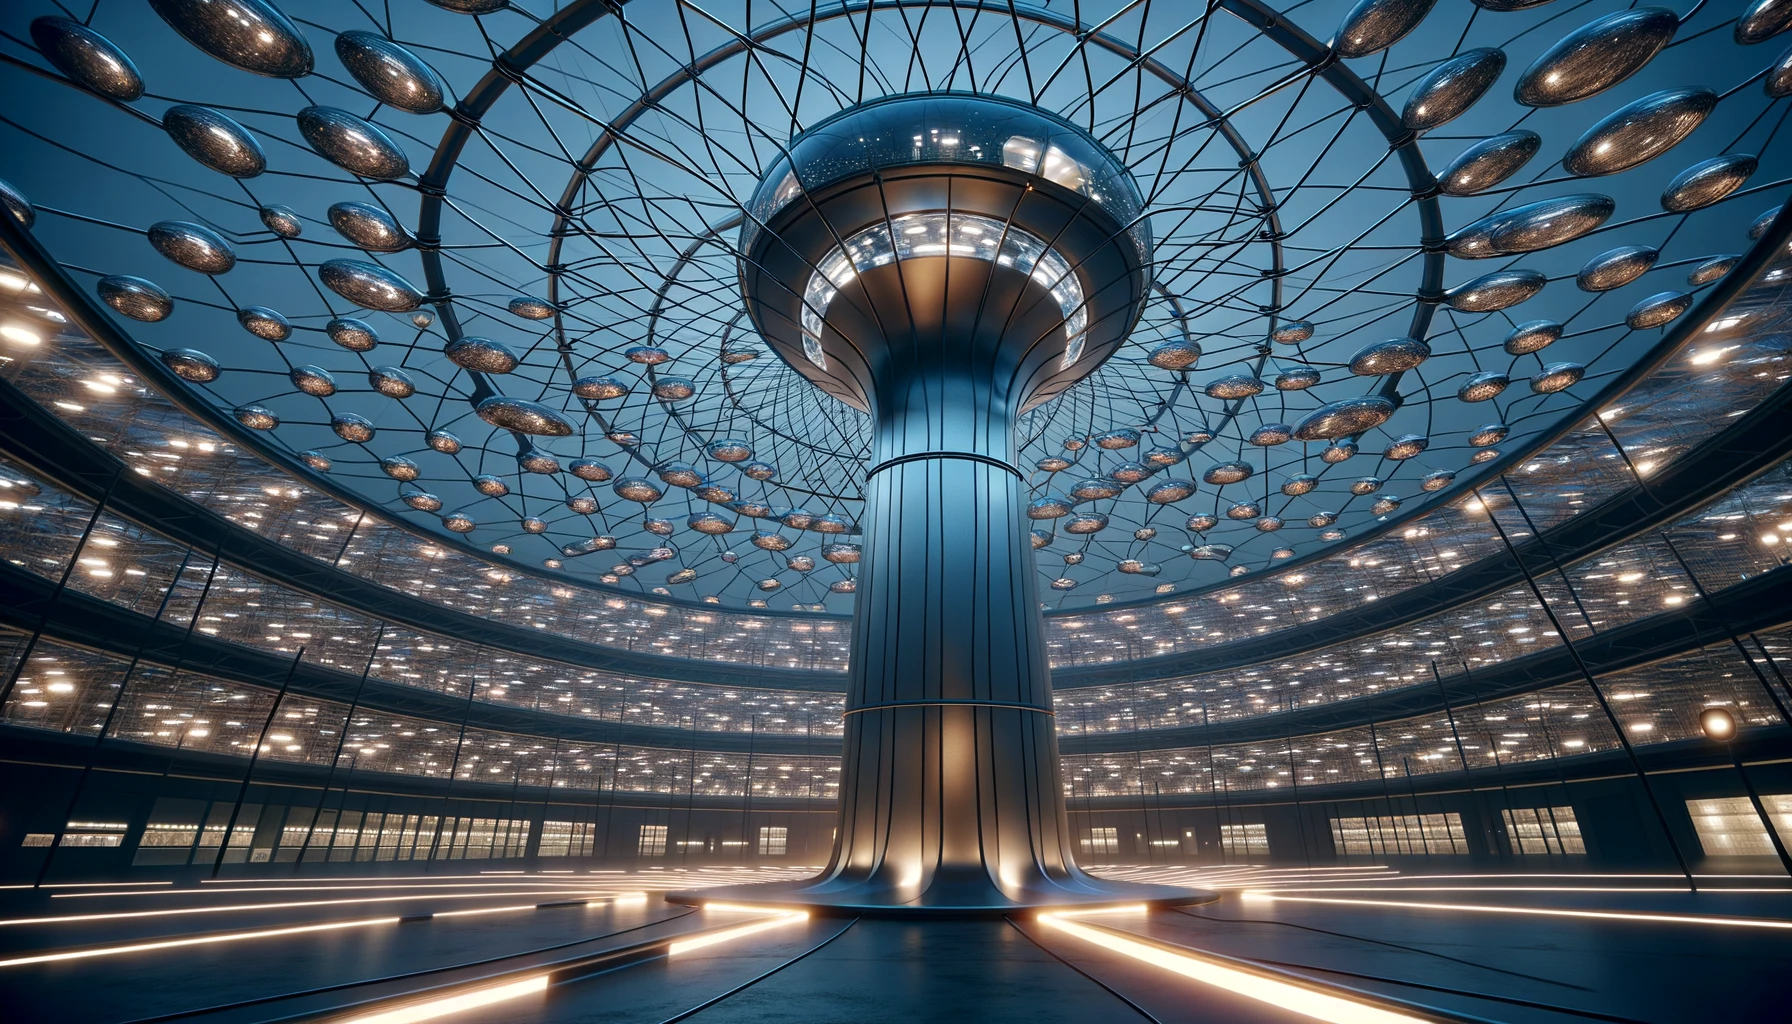 photo-realistic images of a stylized version of the 'Panopticon' prison architecture, adapted to depict a futuristic network of nodes.